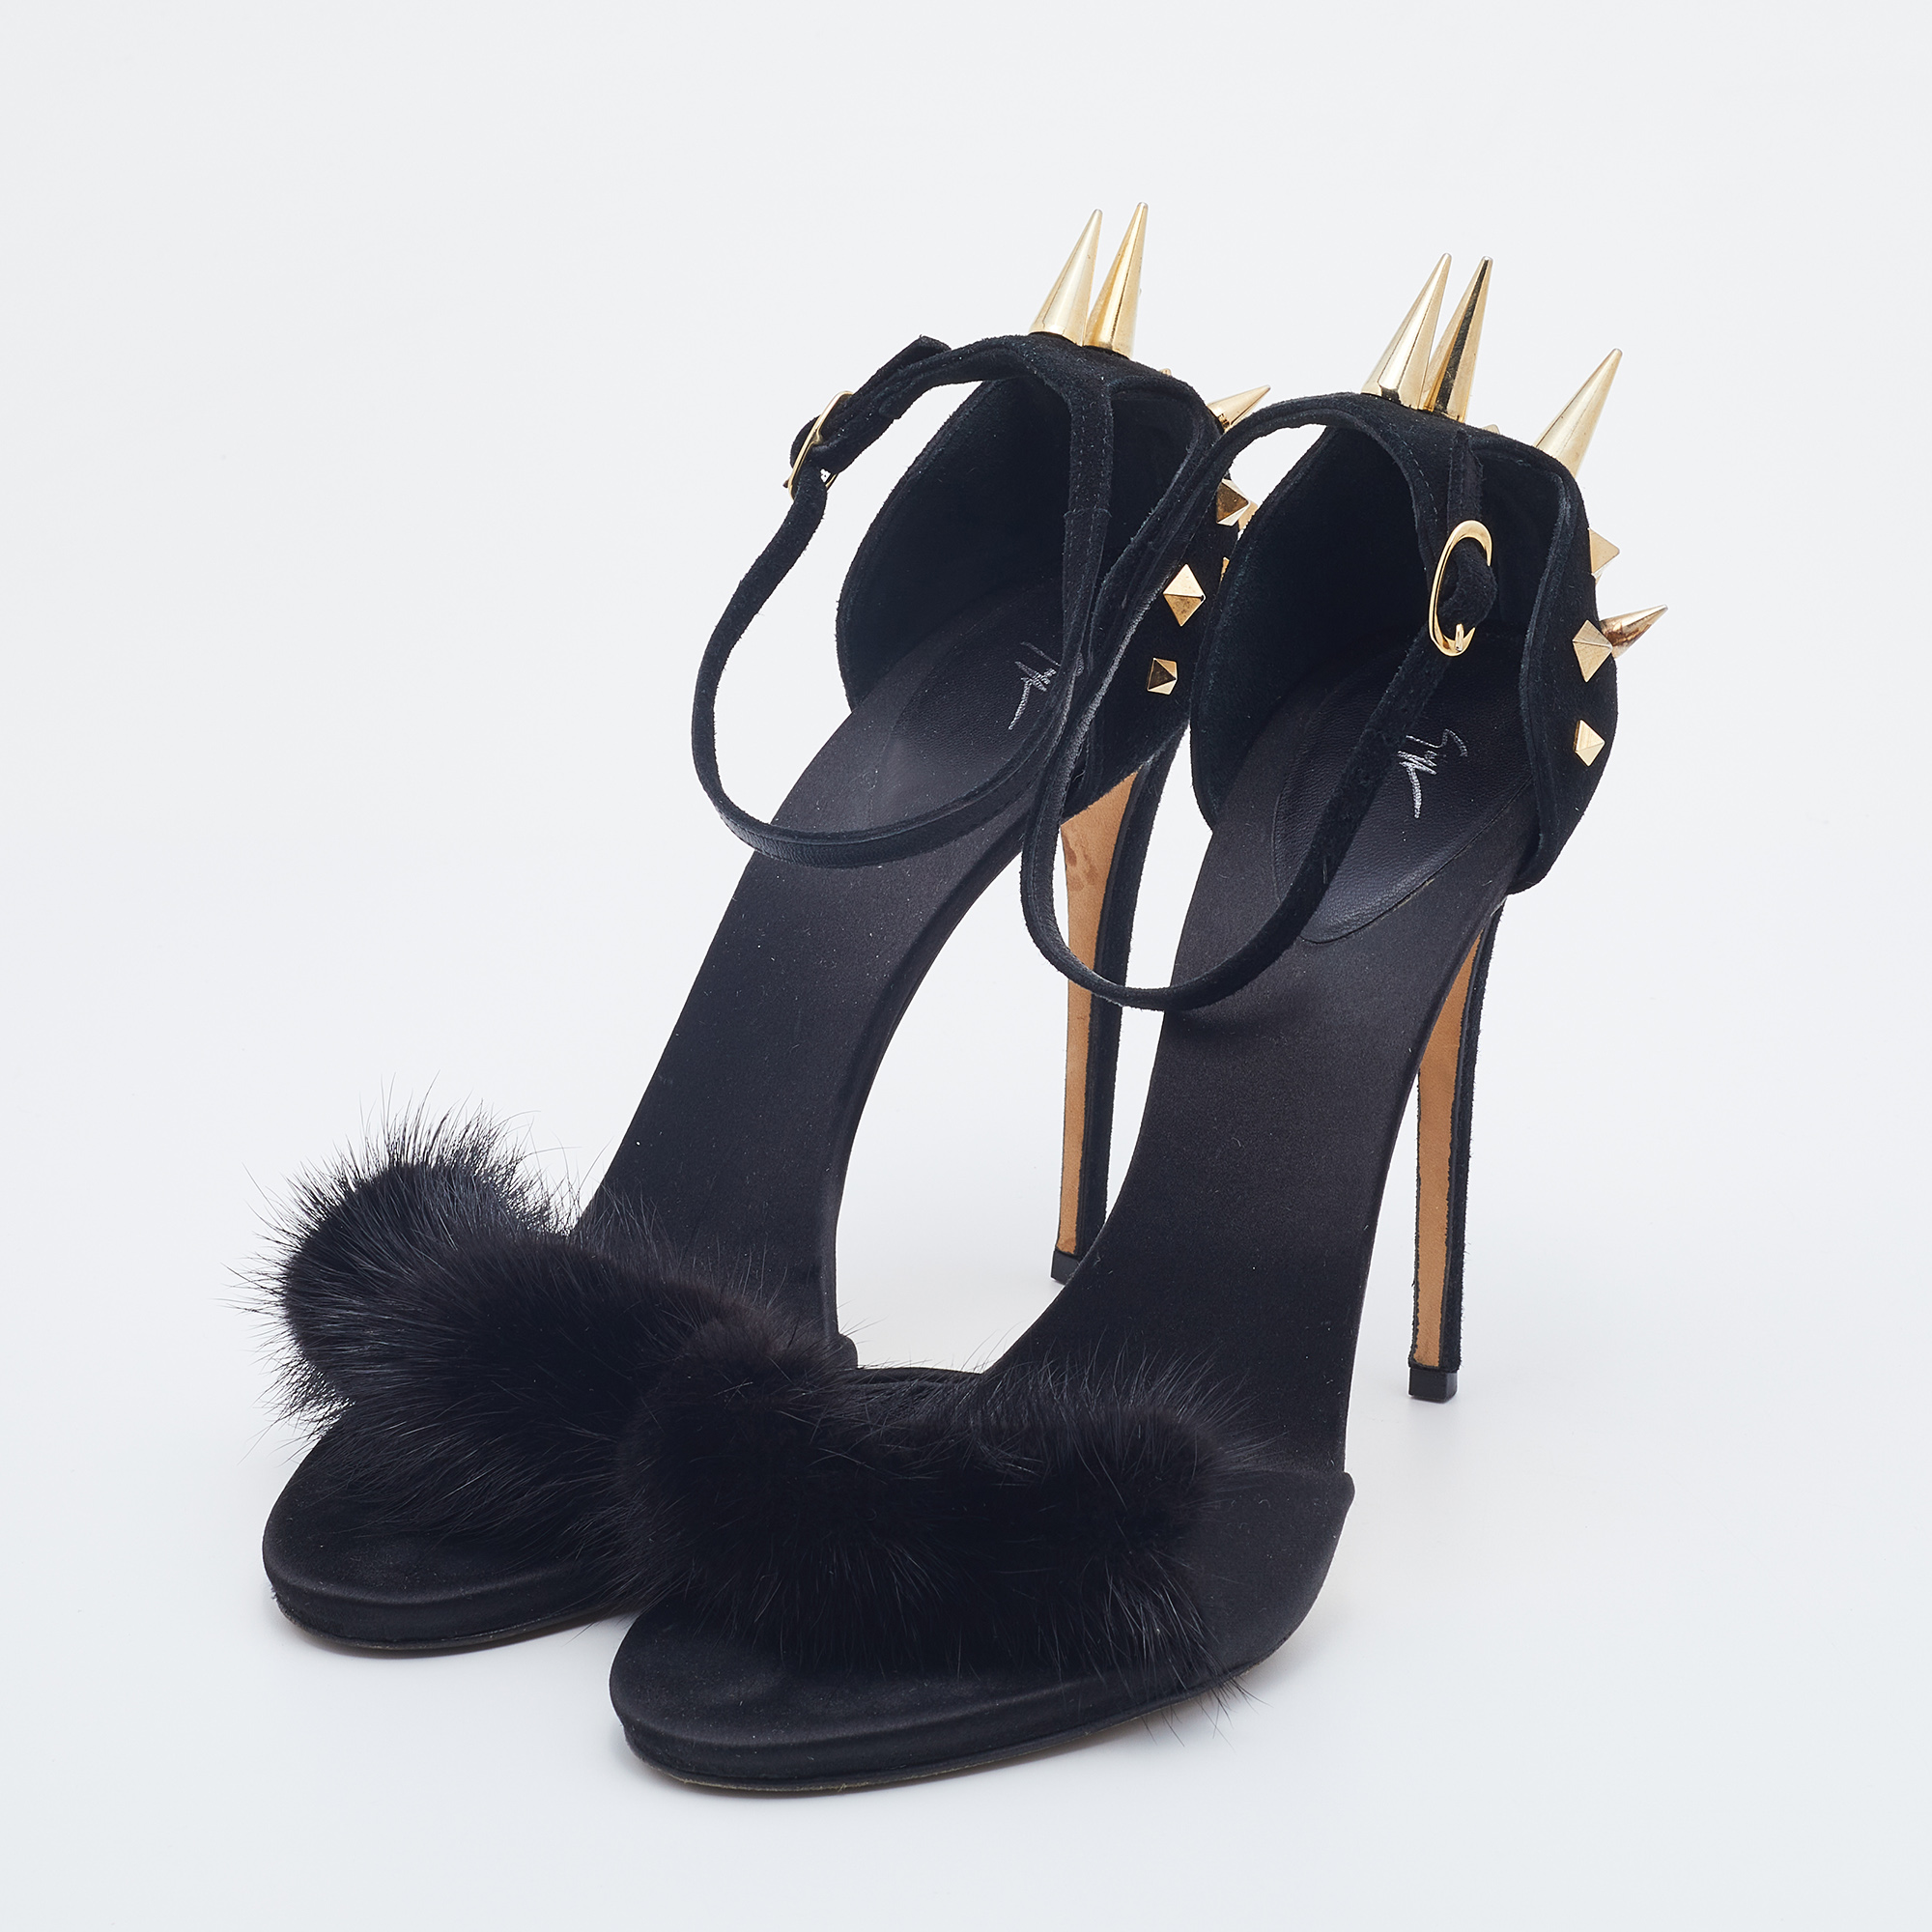 

Giuseppe Zanotti Black Suede and Fur Spiked Ankle Strap Sandals Size